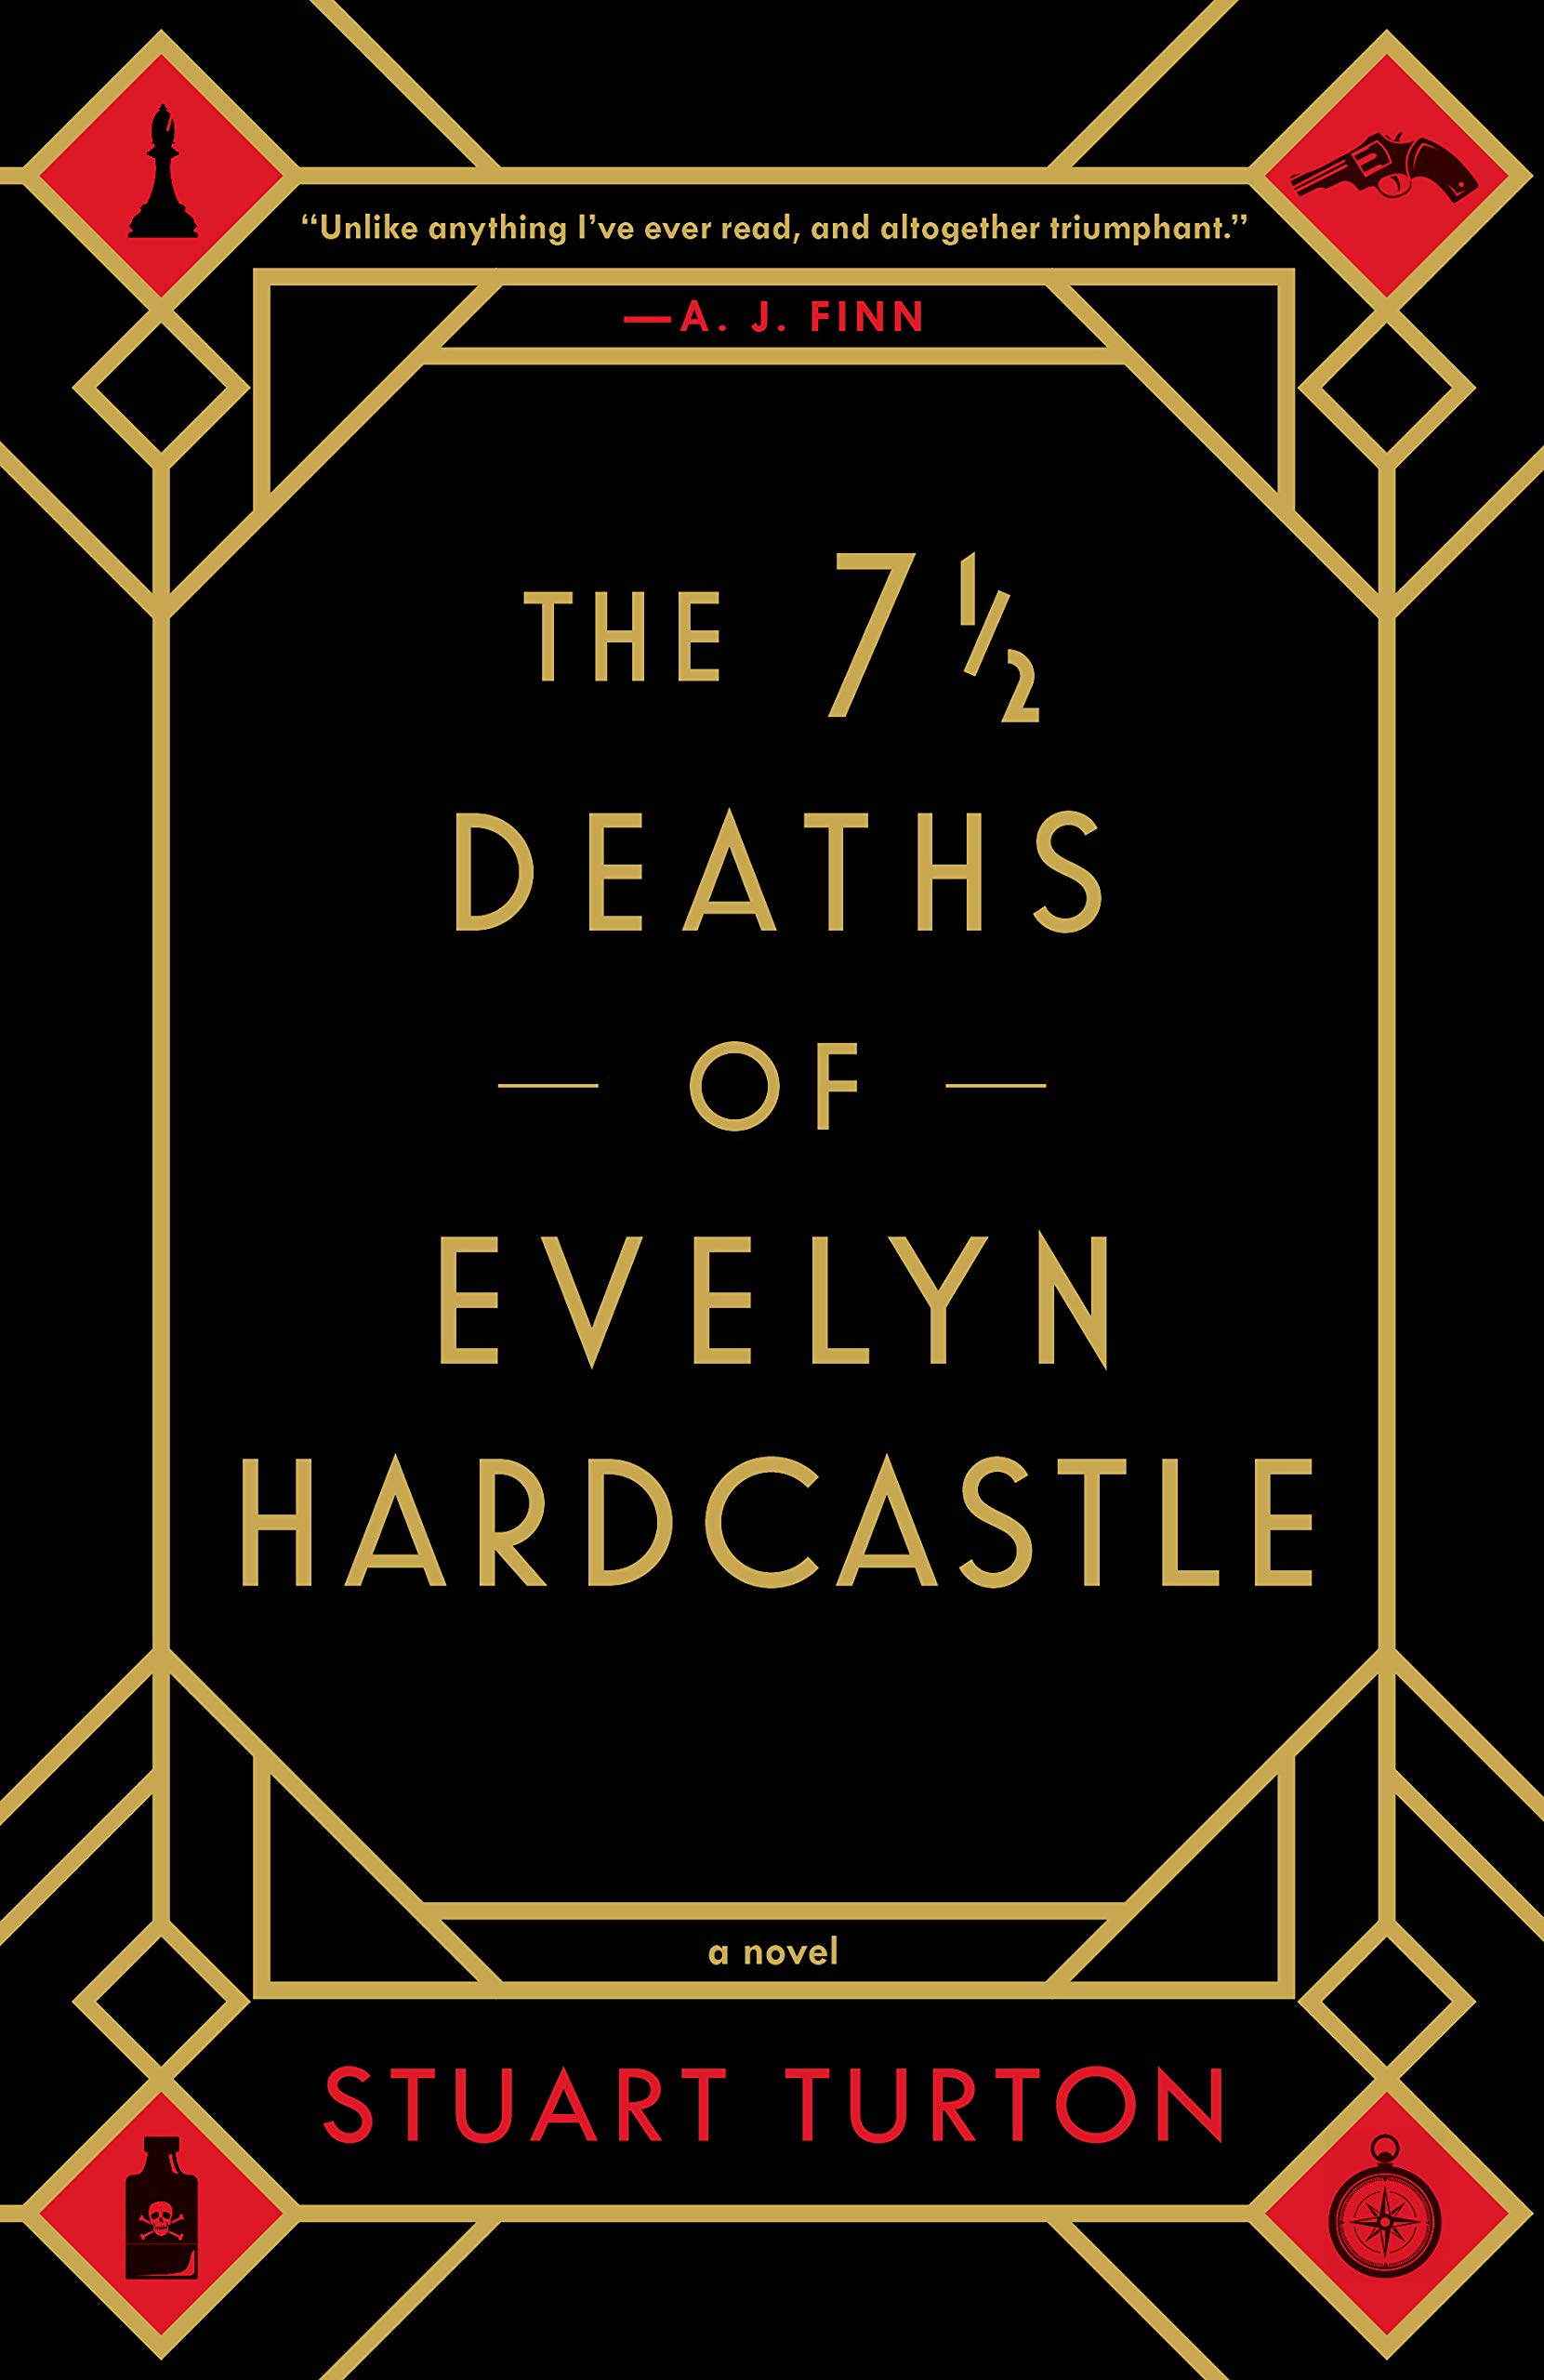 the 7 and a half deaths of evelyn hardcastle cover